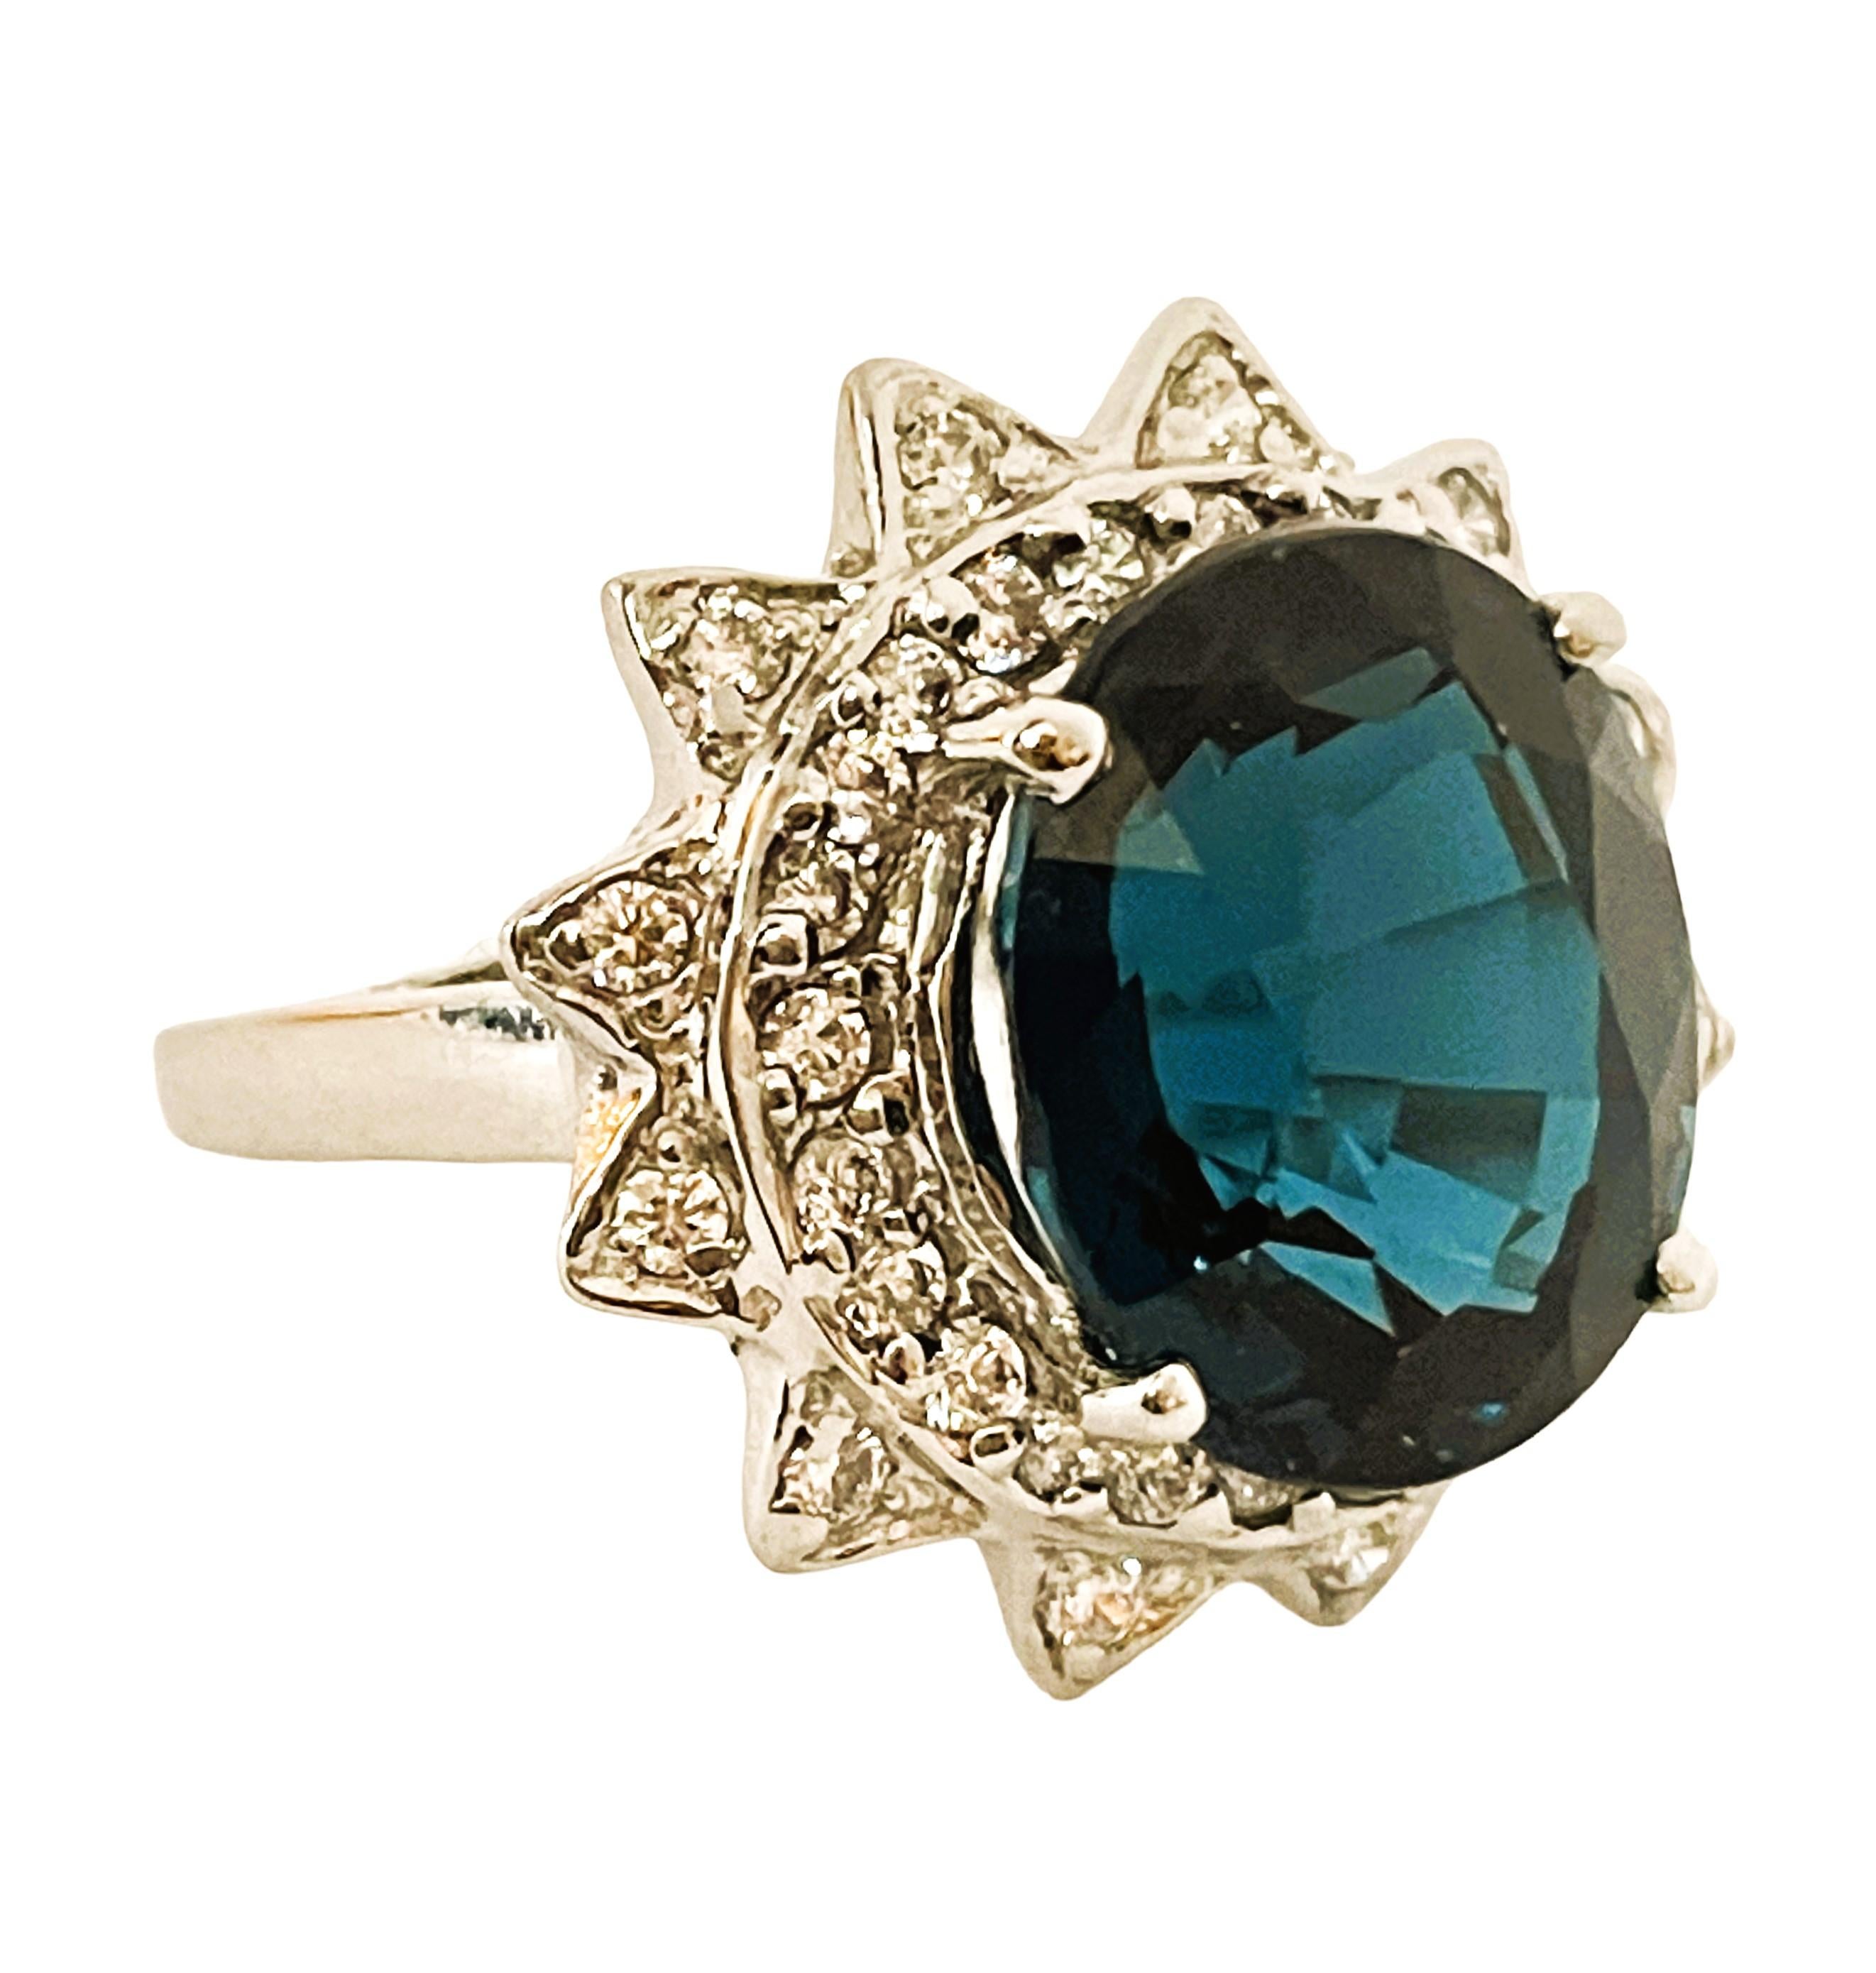 New African Deep Blue Teal 8.60ct Tourmaline & Sapphire Sterling Ring 2